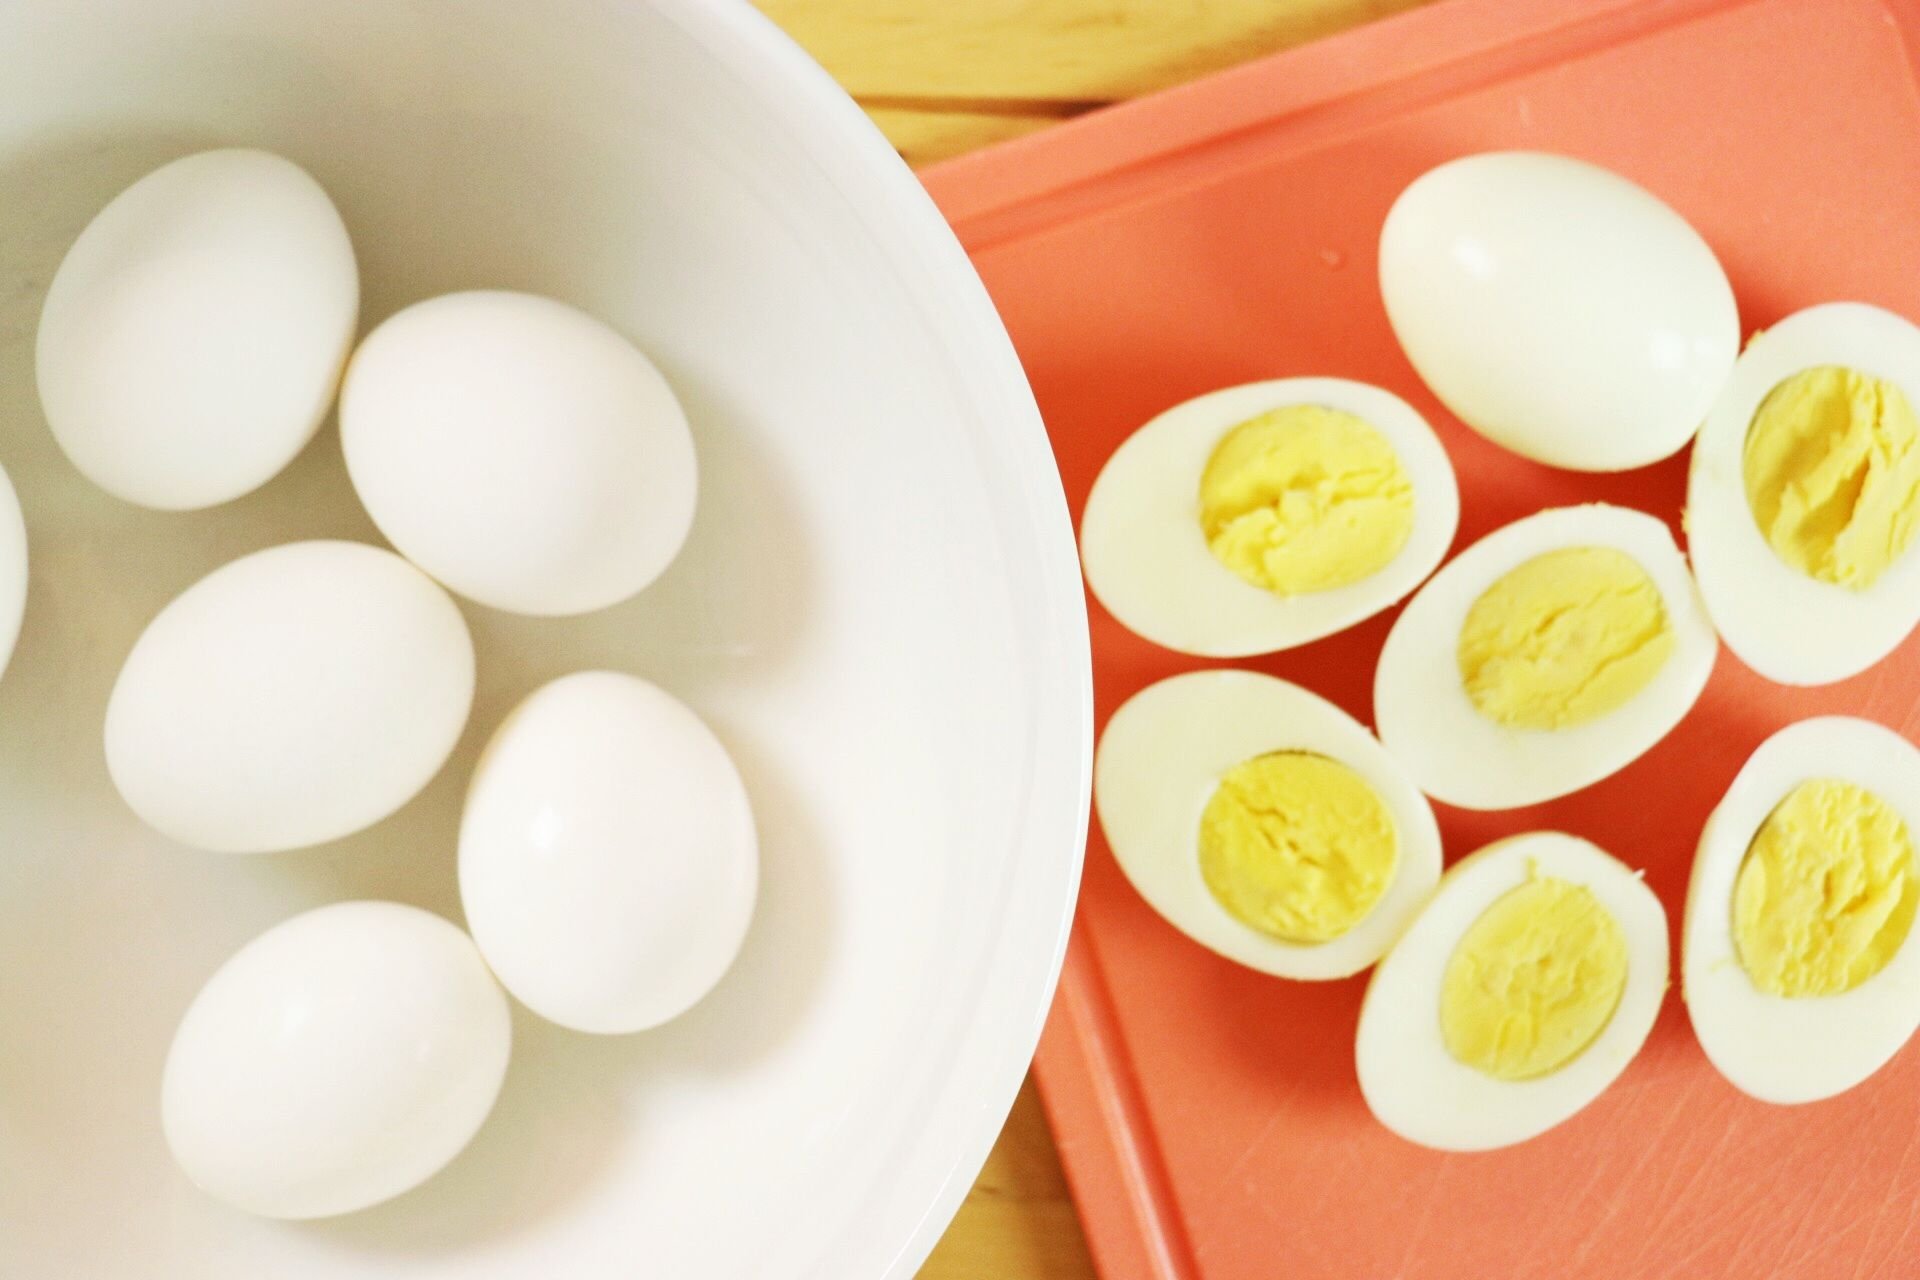 Step-By-Step How To Hard Boil Eggs In An Instant Pot